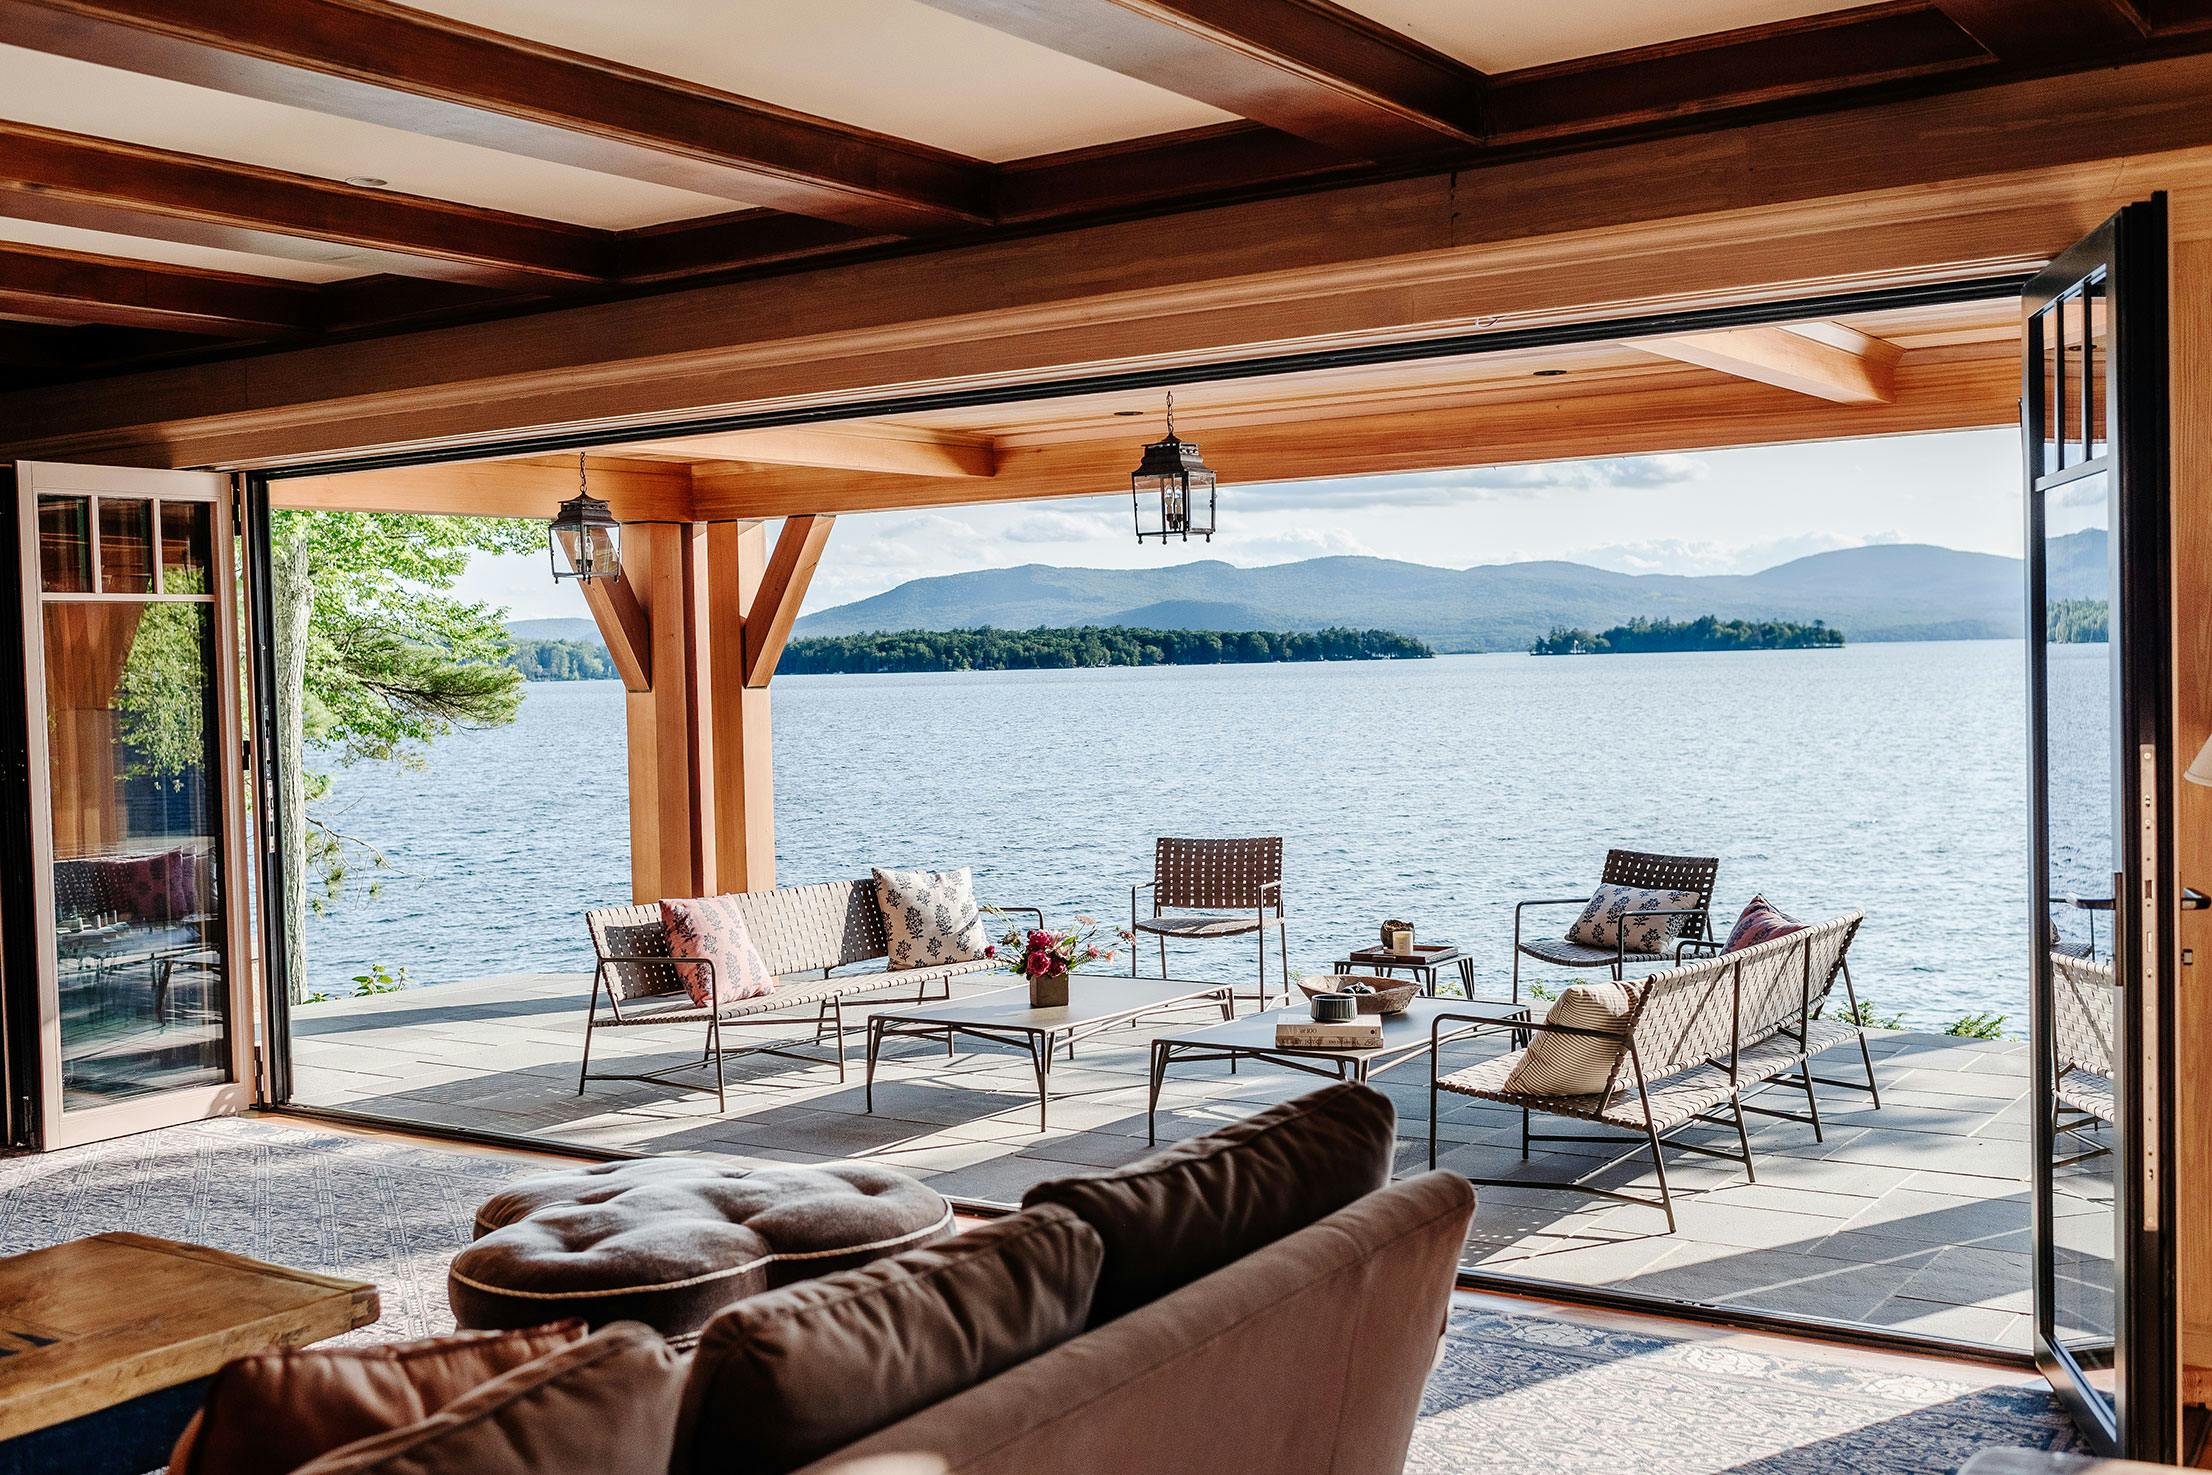 A spacious living room with folding glass walls that offer a stunning view of the serene lake